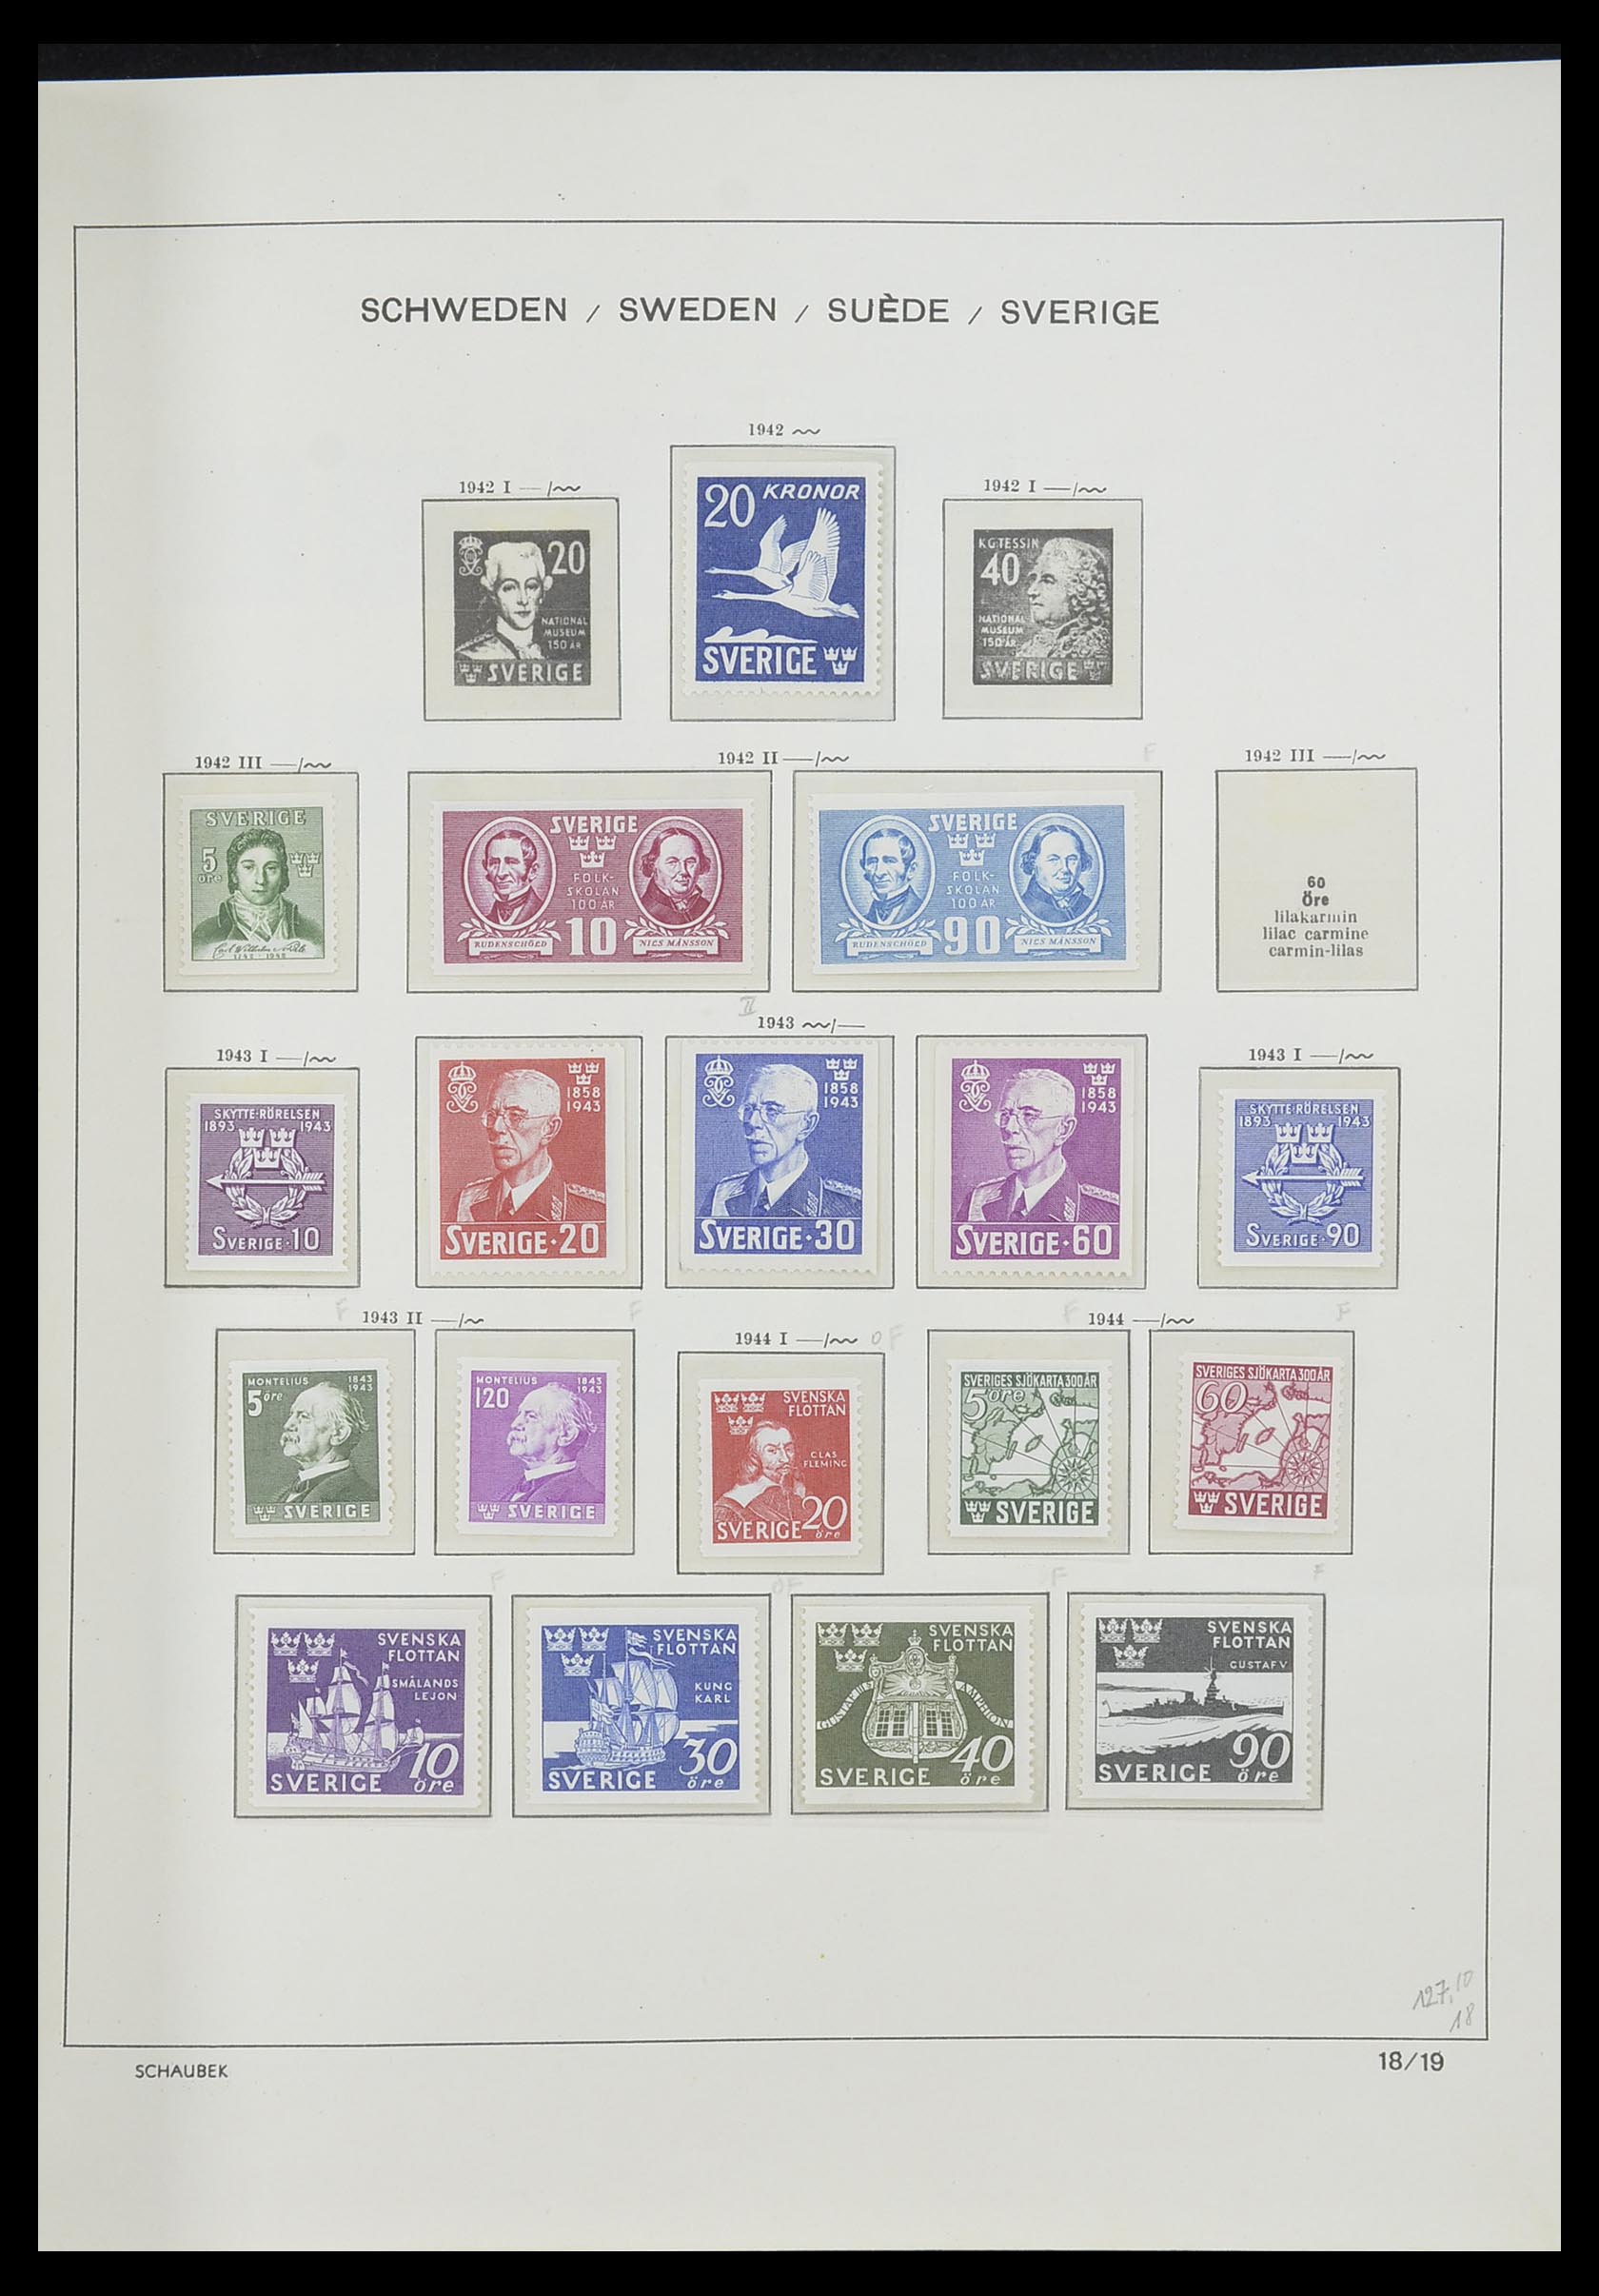 33293 031 - Stamp collection 33293 Sweden 1855-1996.